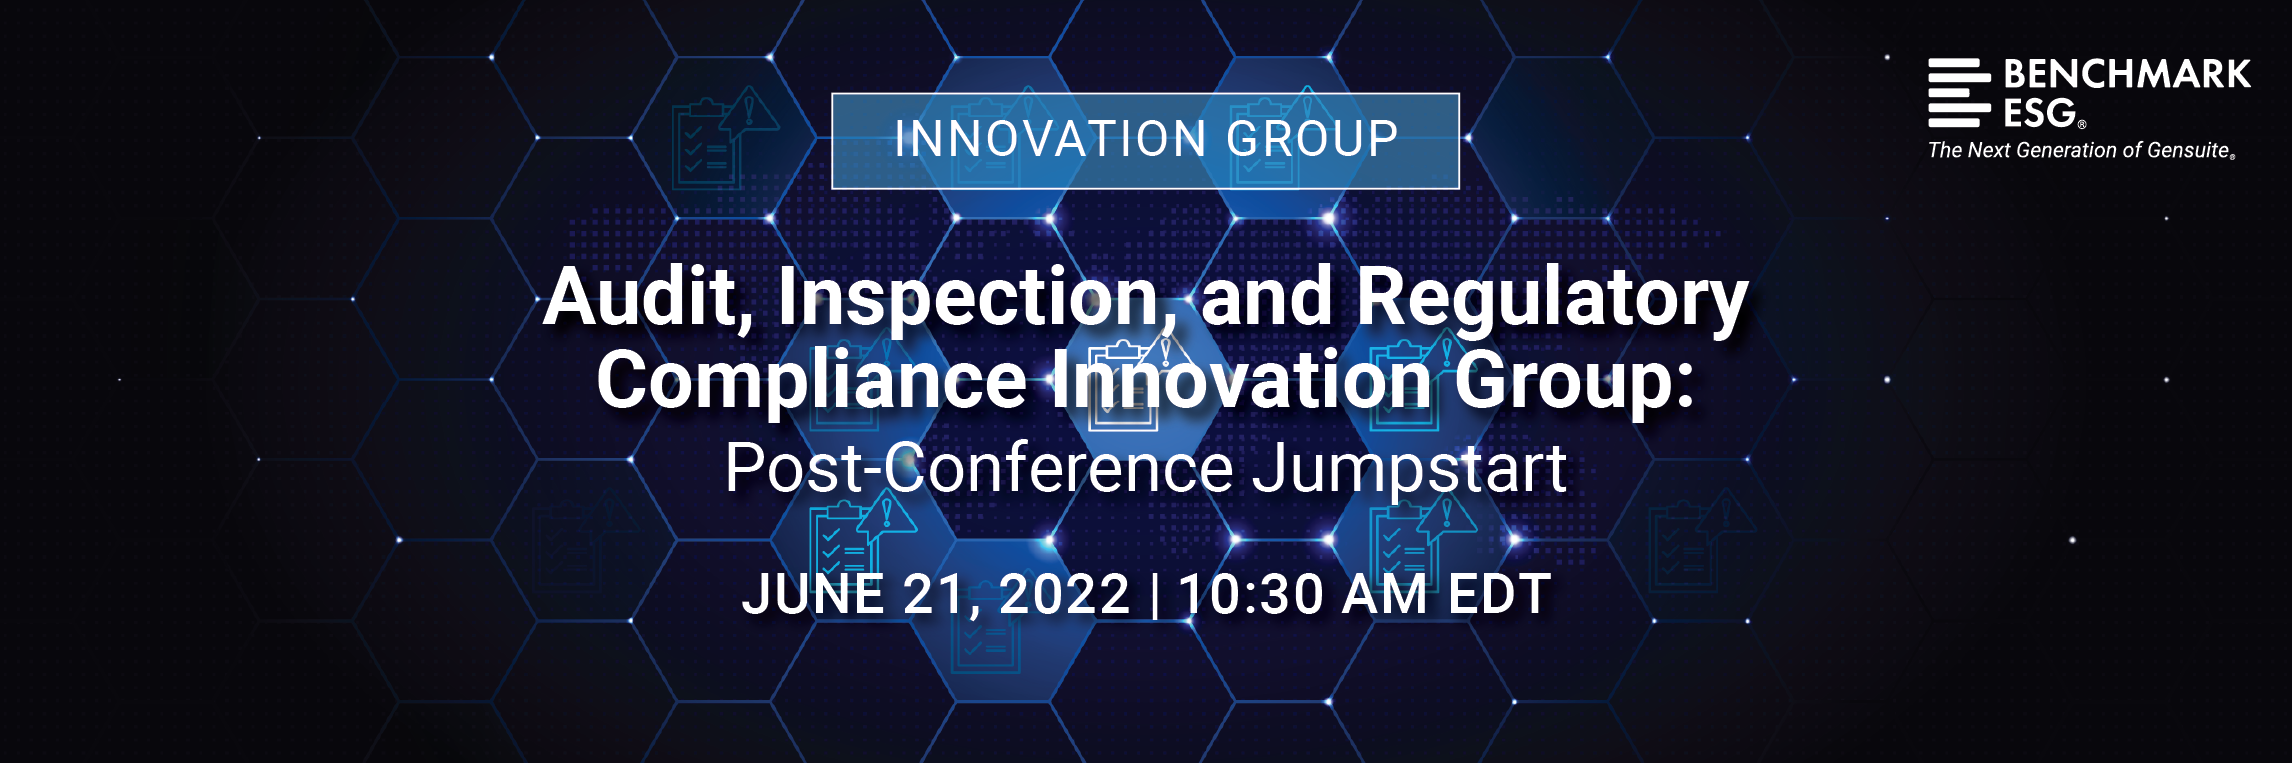 Audit, Inspection, and Regulatory Compliance Innovation Group Banner